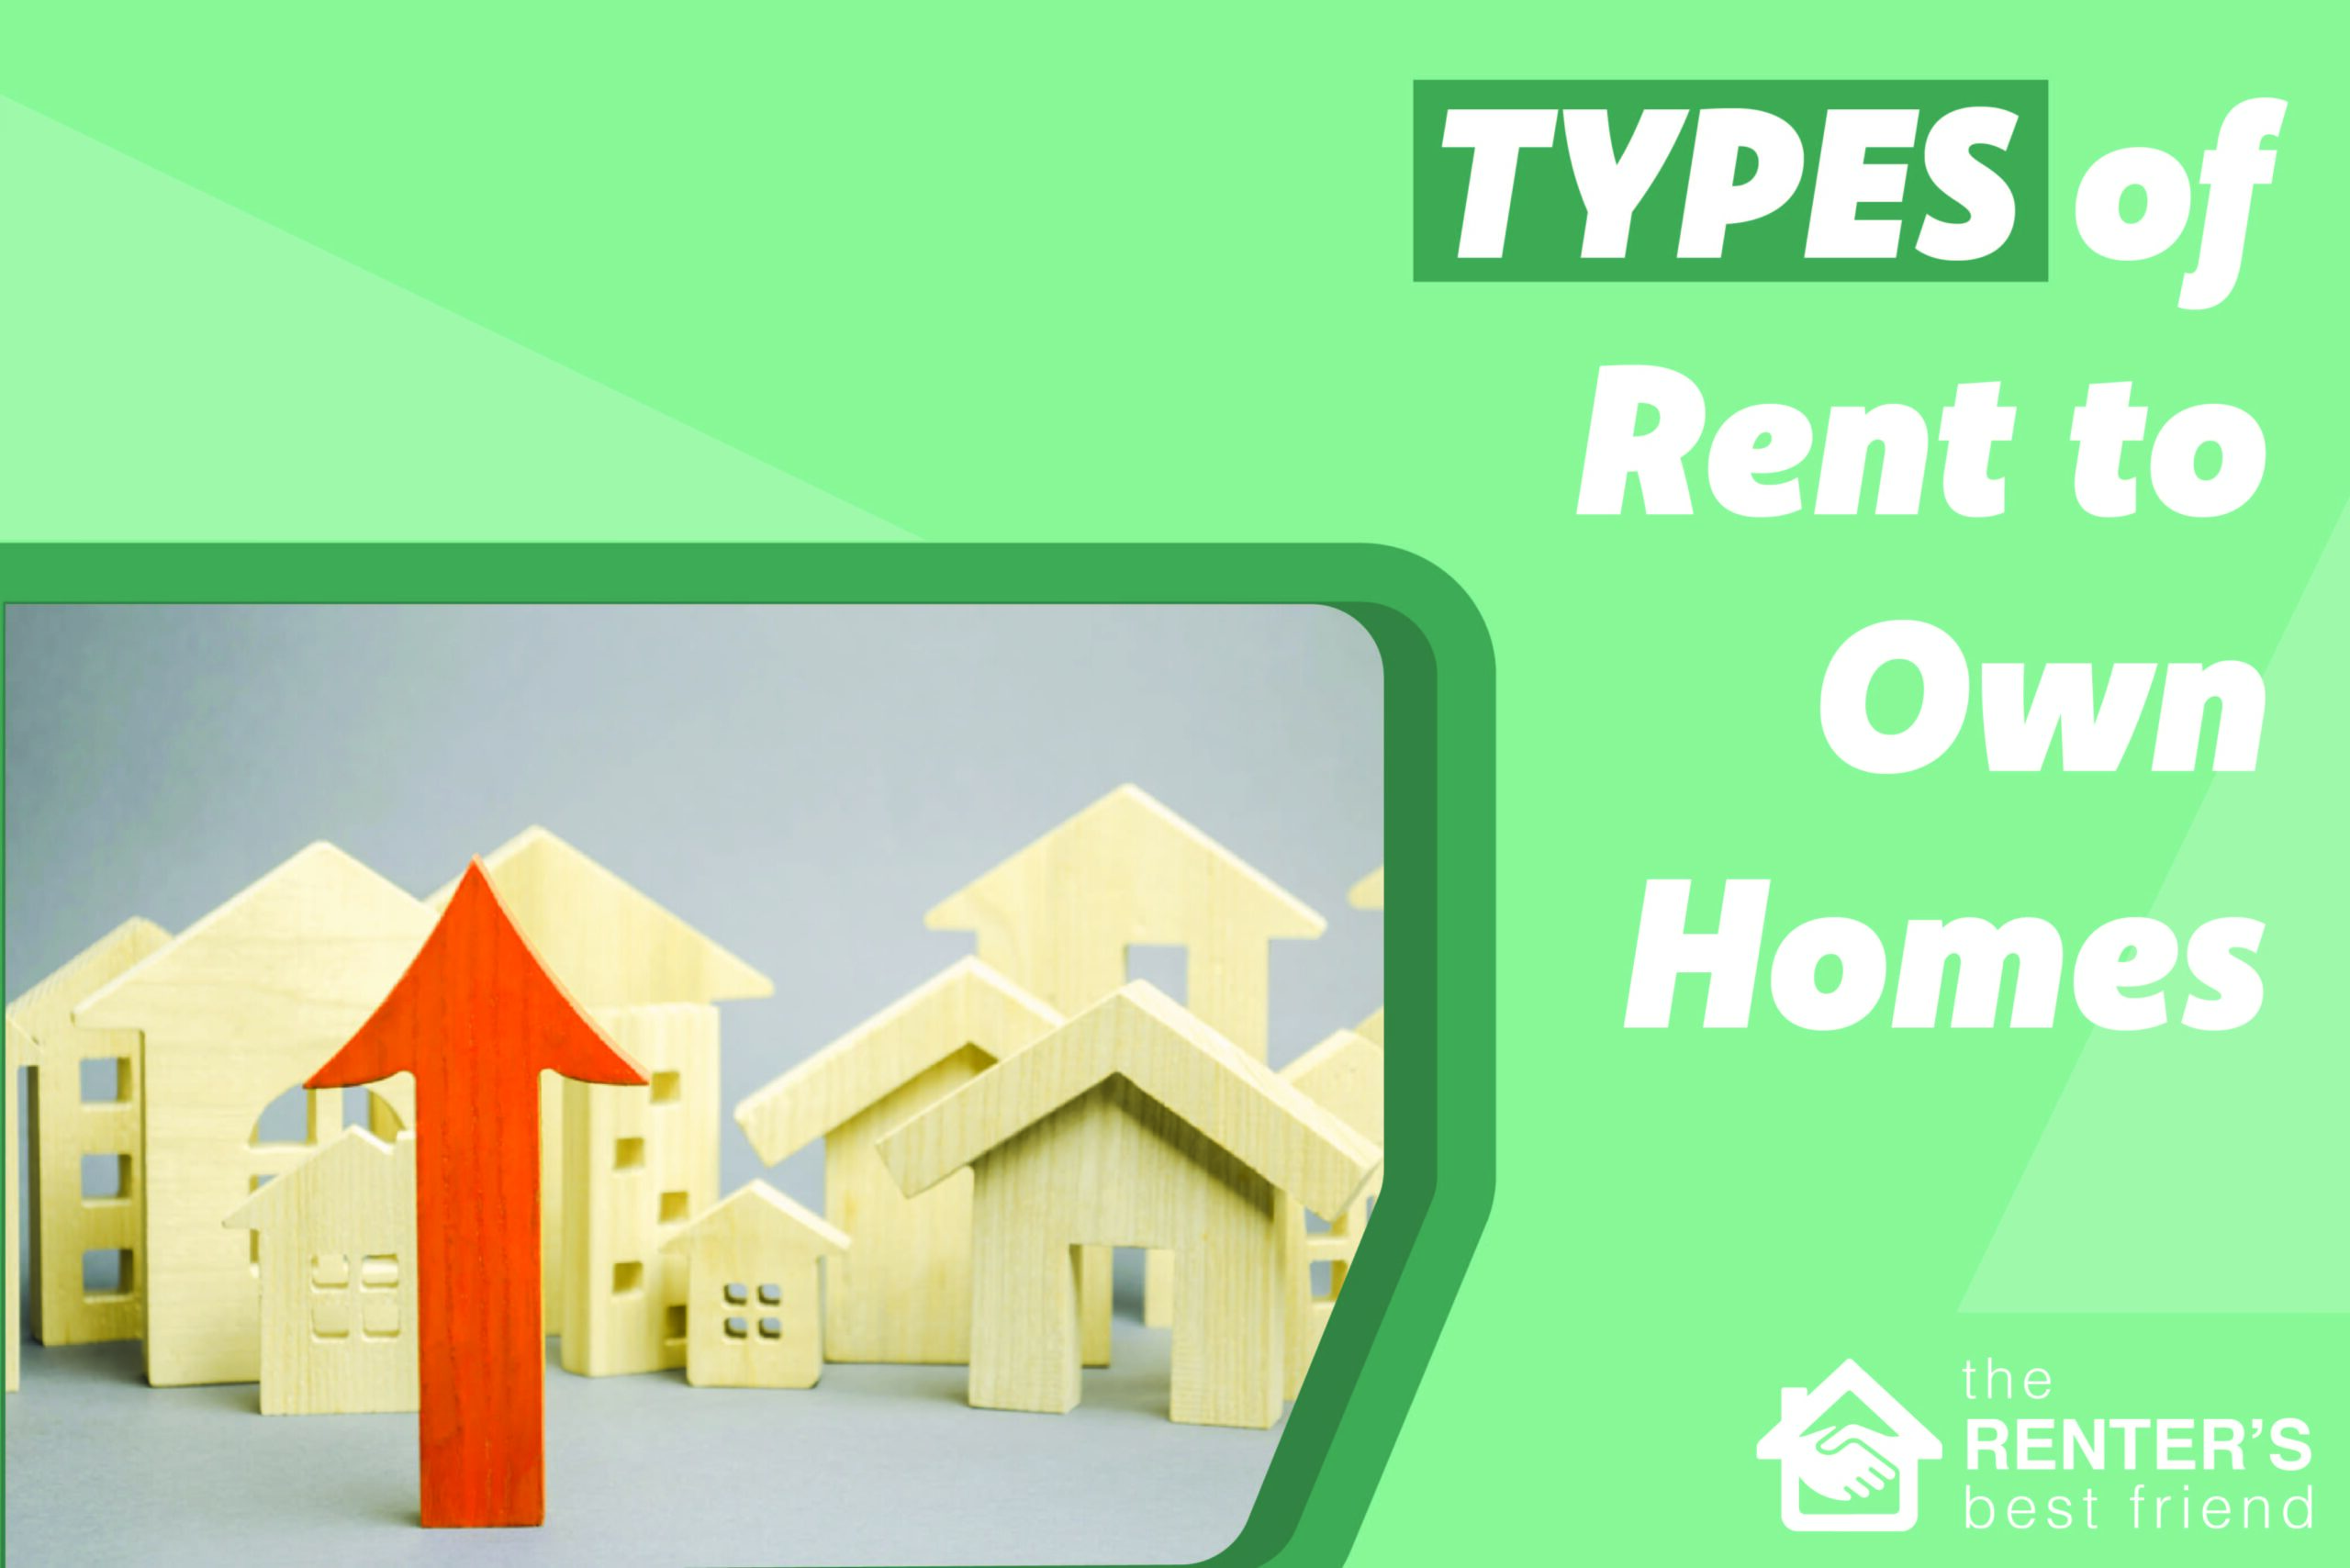 Types of rent to own homes.